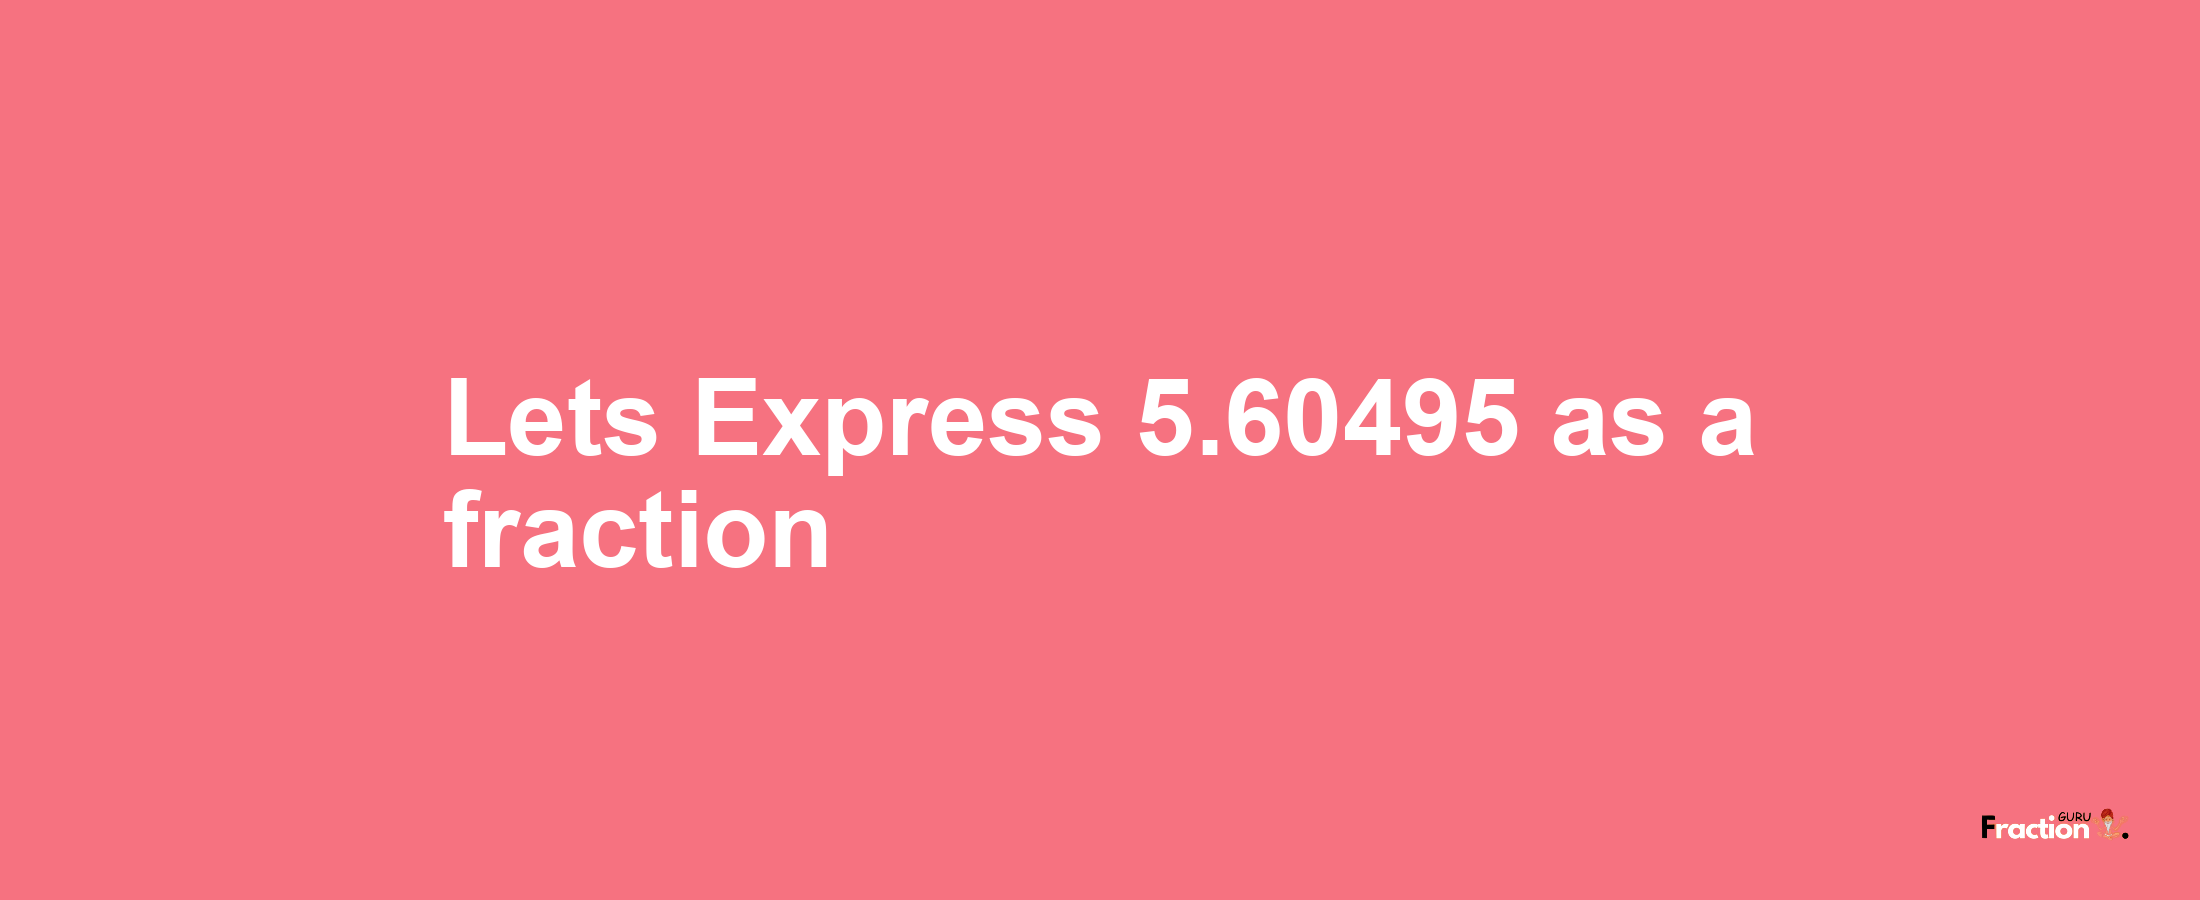 Lets Express 5.60495 as afraction